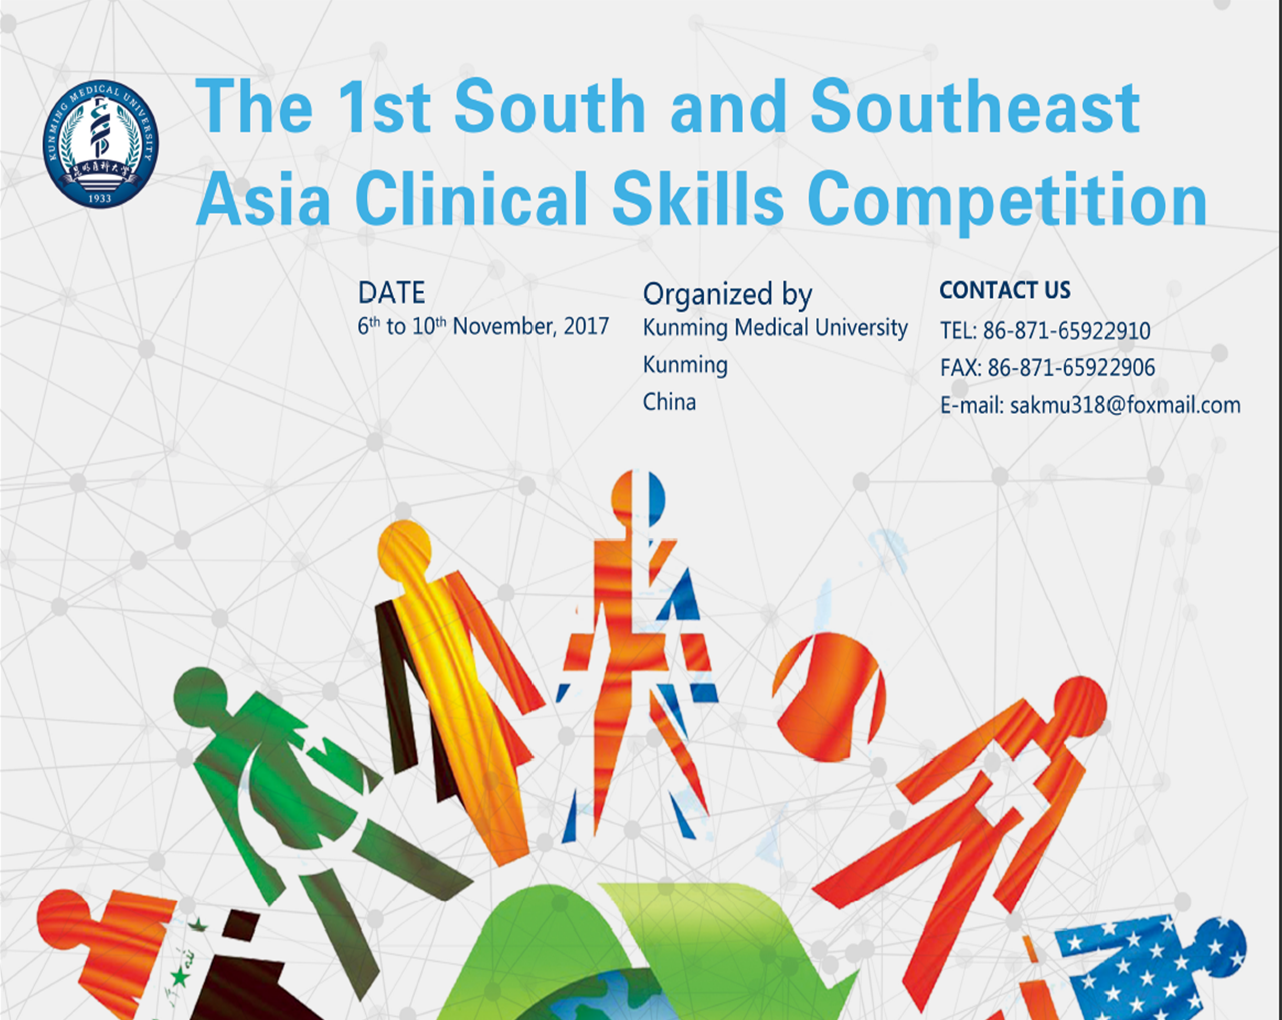 Invitation for the 1st South and Southeast Asia Clinical Skills Competition